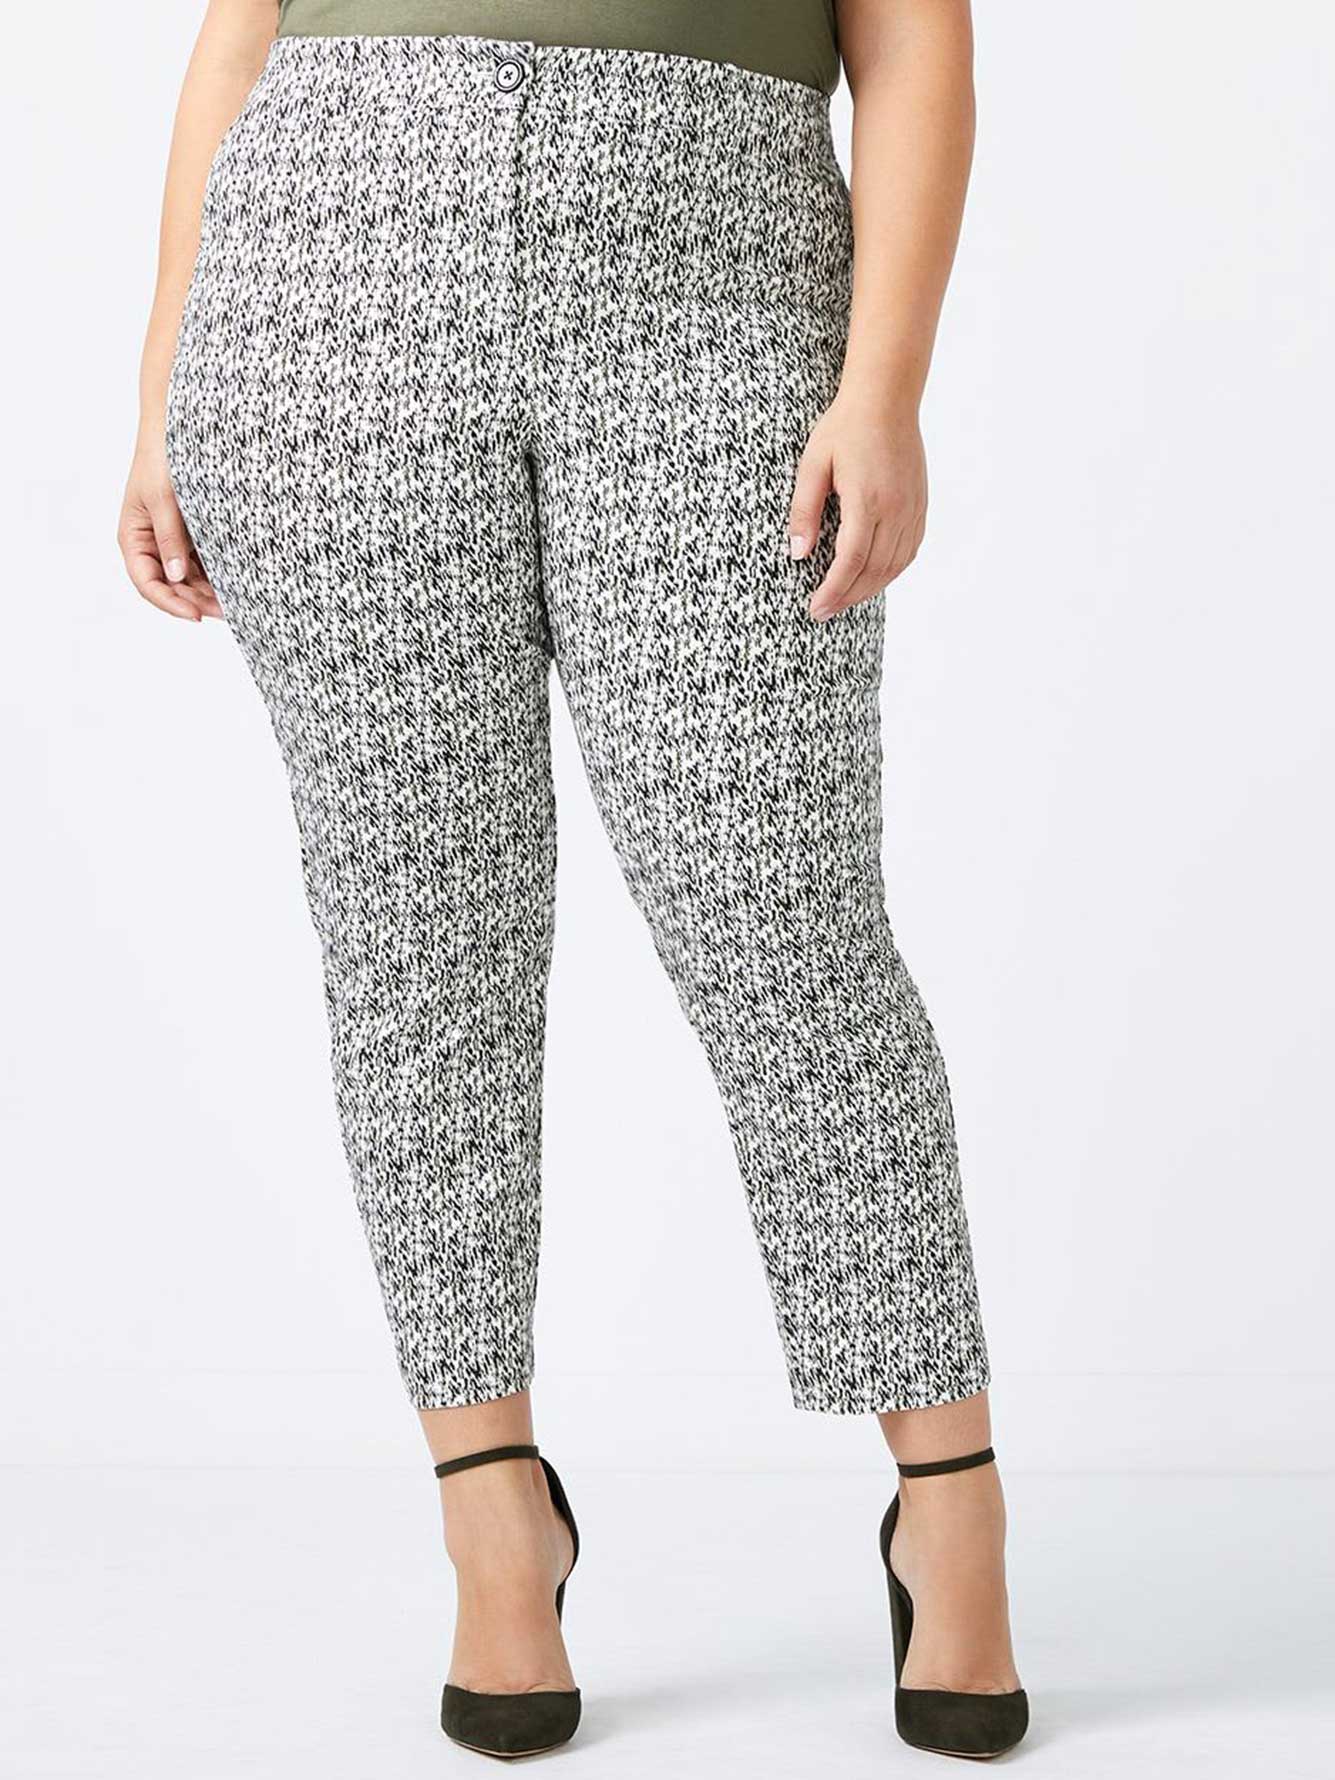 Savvy Chic Printed Ankle Pant - In Every Story | Penningtons